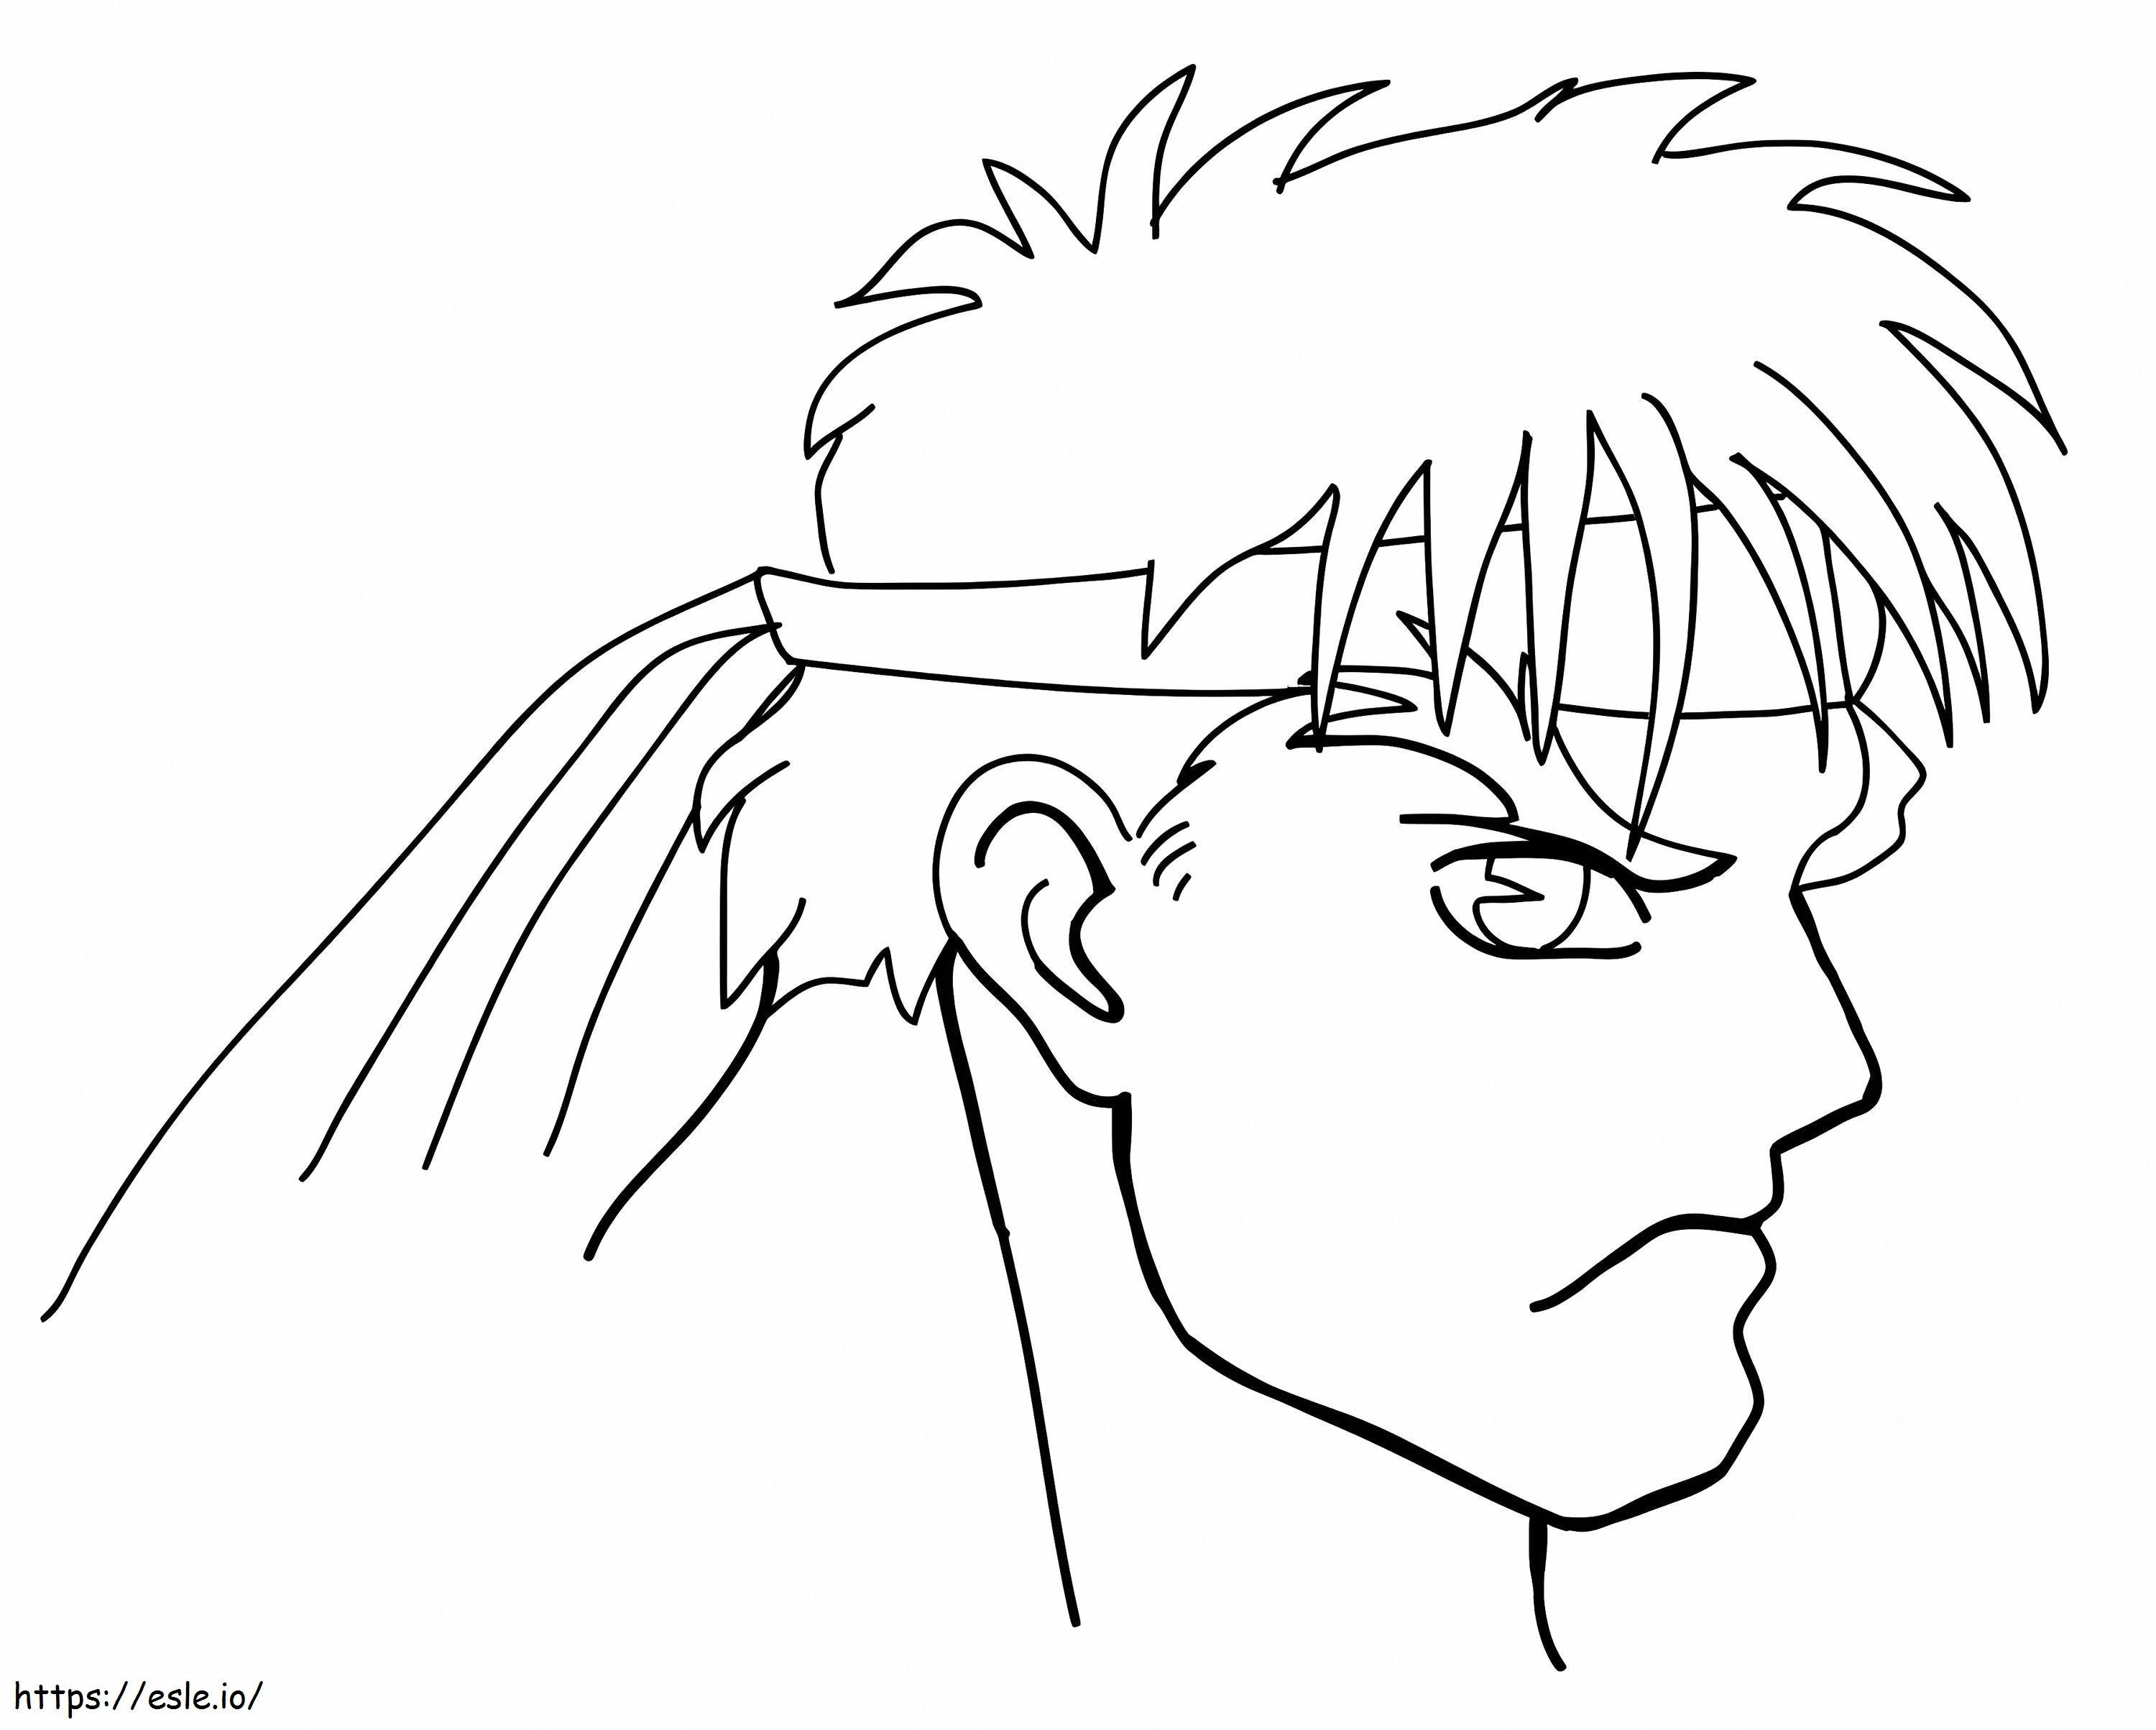 Ryus Face coloring page